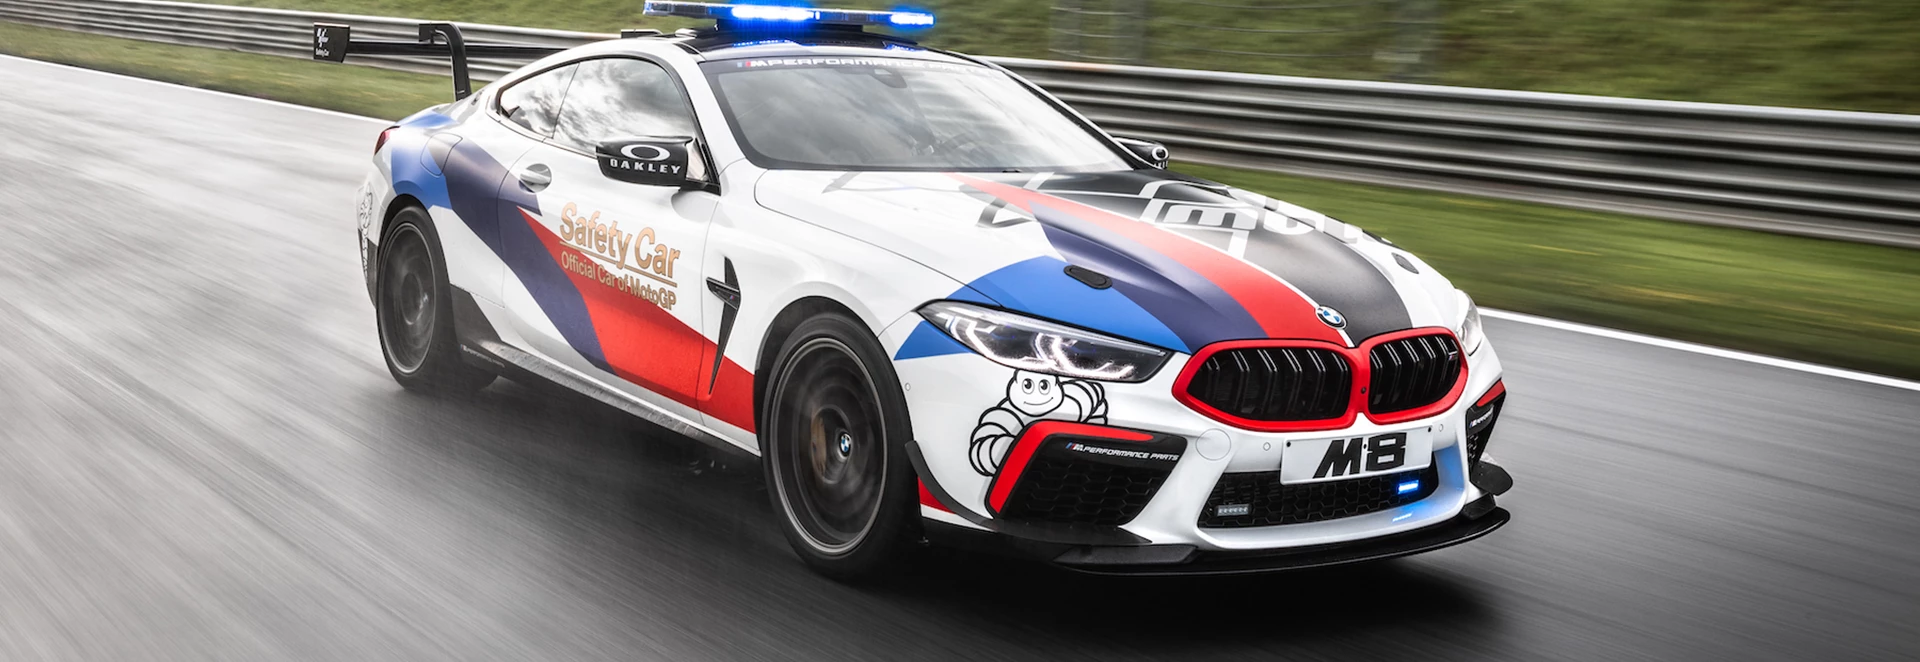 2019 BMW M8 Competition confirmed as the new MotoGP Safety Car